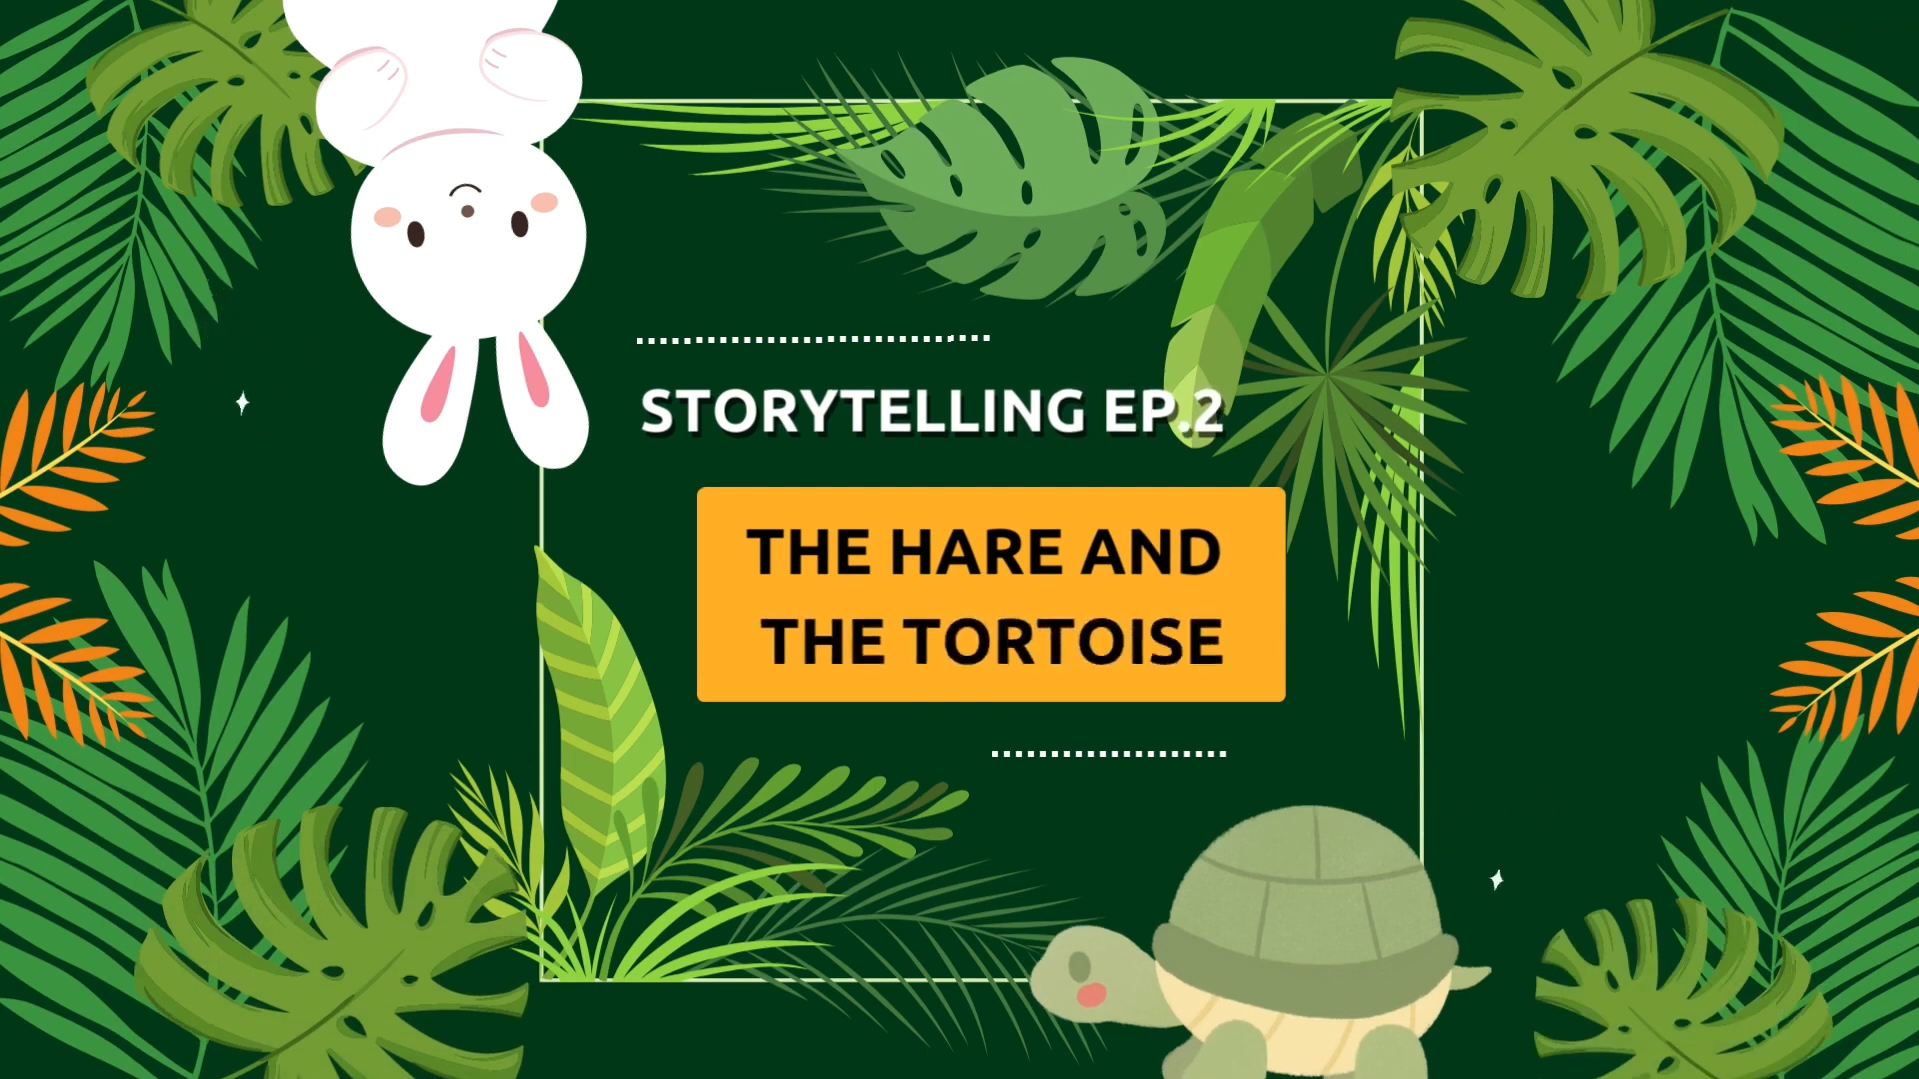 Storytelling EP.2 “The hare and the tortoise” 🐇🐢